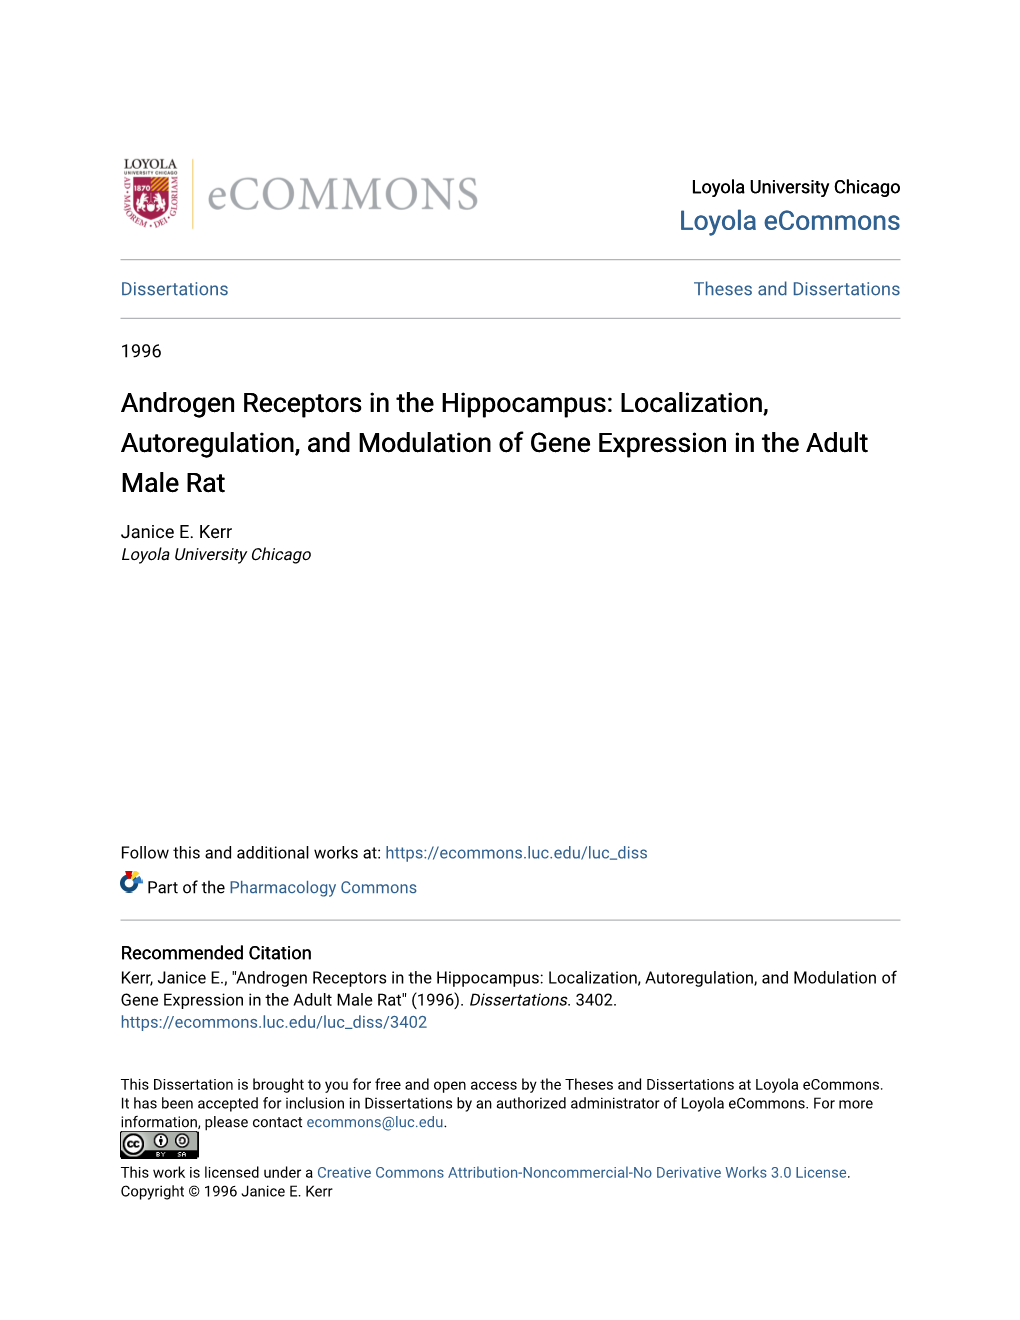 Androgen Receptors in the Hippocampus: Localization, Autoregulation, and Modulation of Gene Expression in the Adult Male Rat